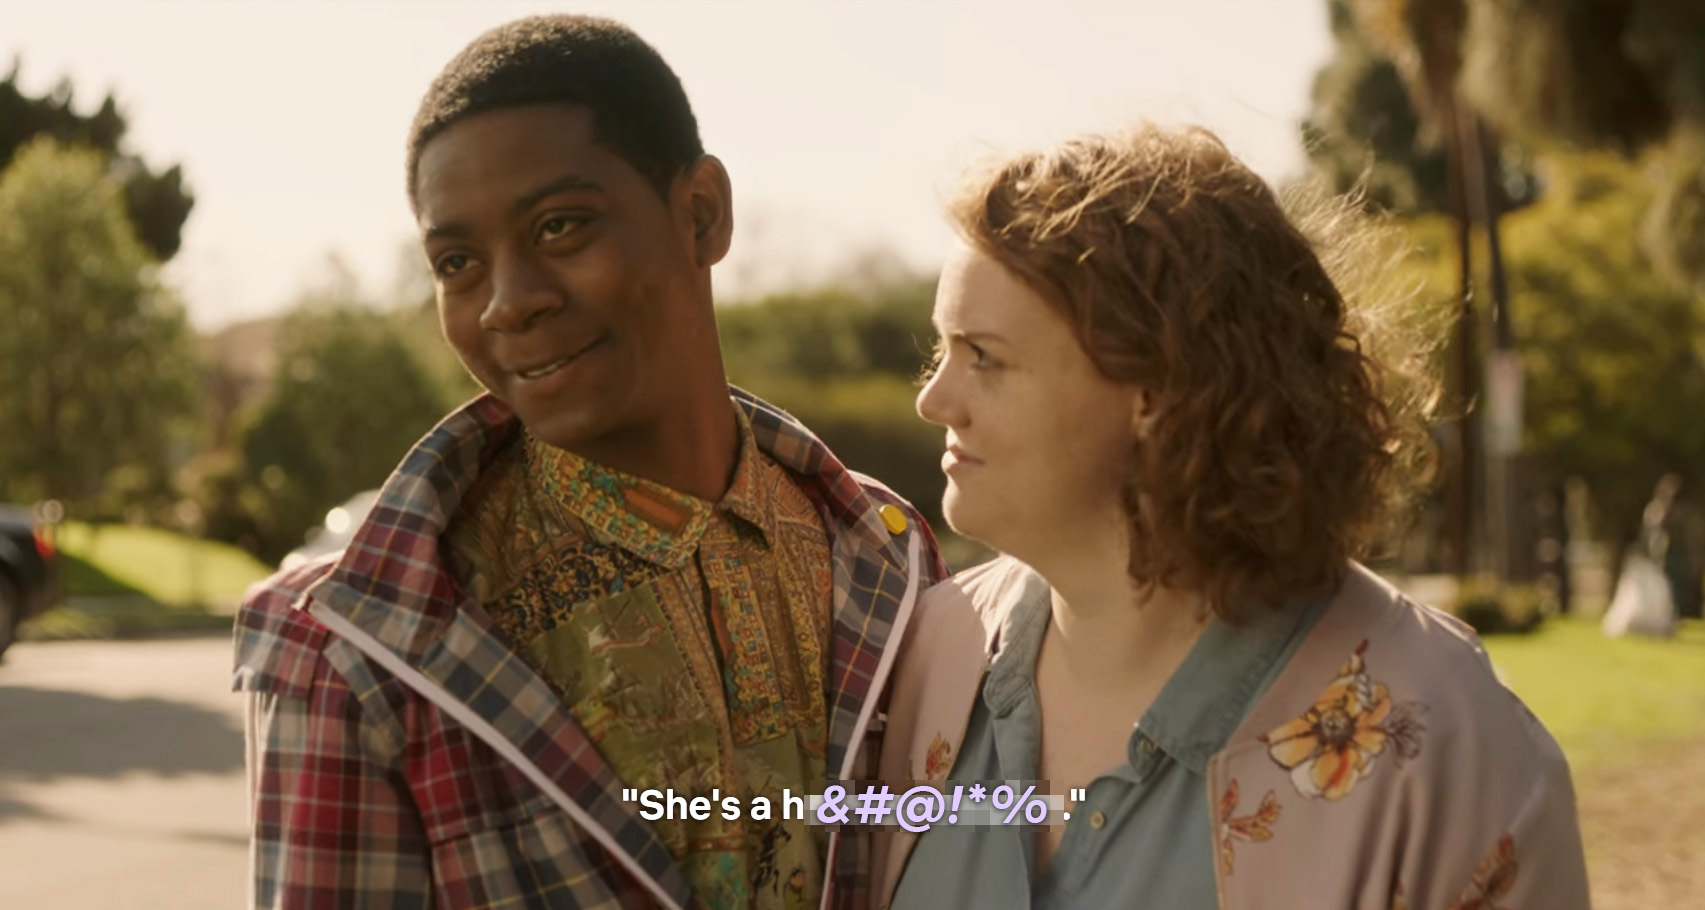 Screenshot from Netflix's "Sierra Burgess is a Loser" that uses a slur against intersex people.